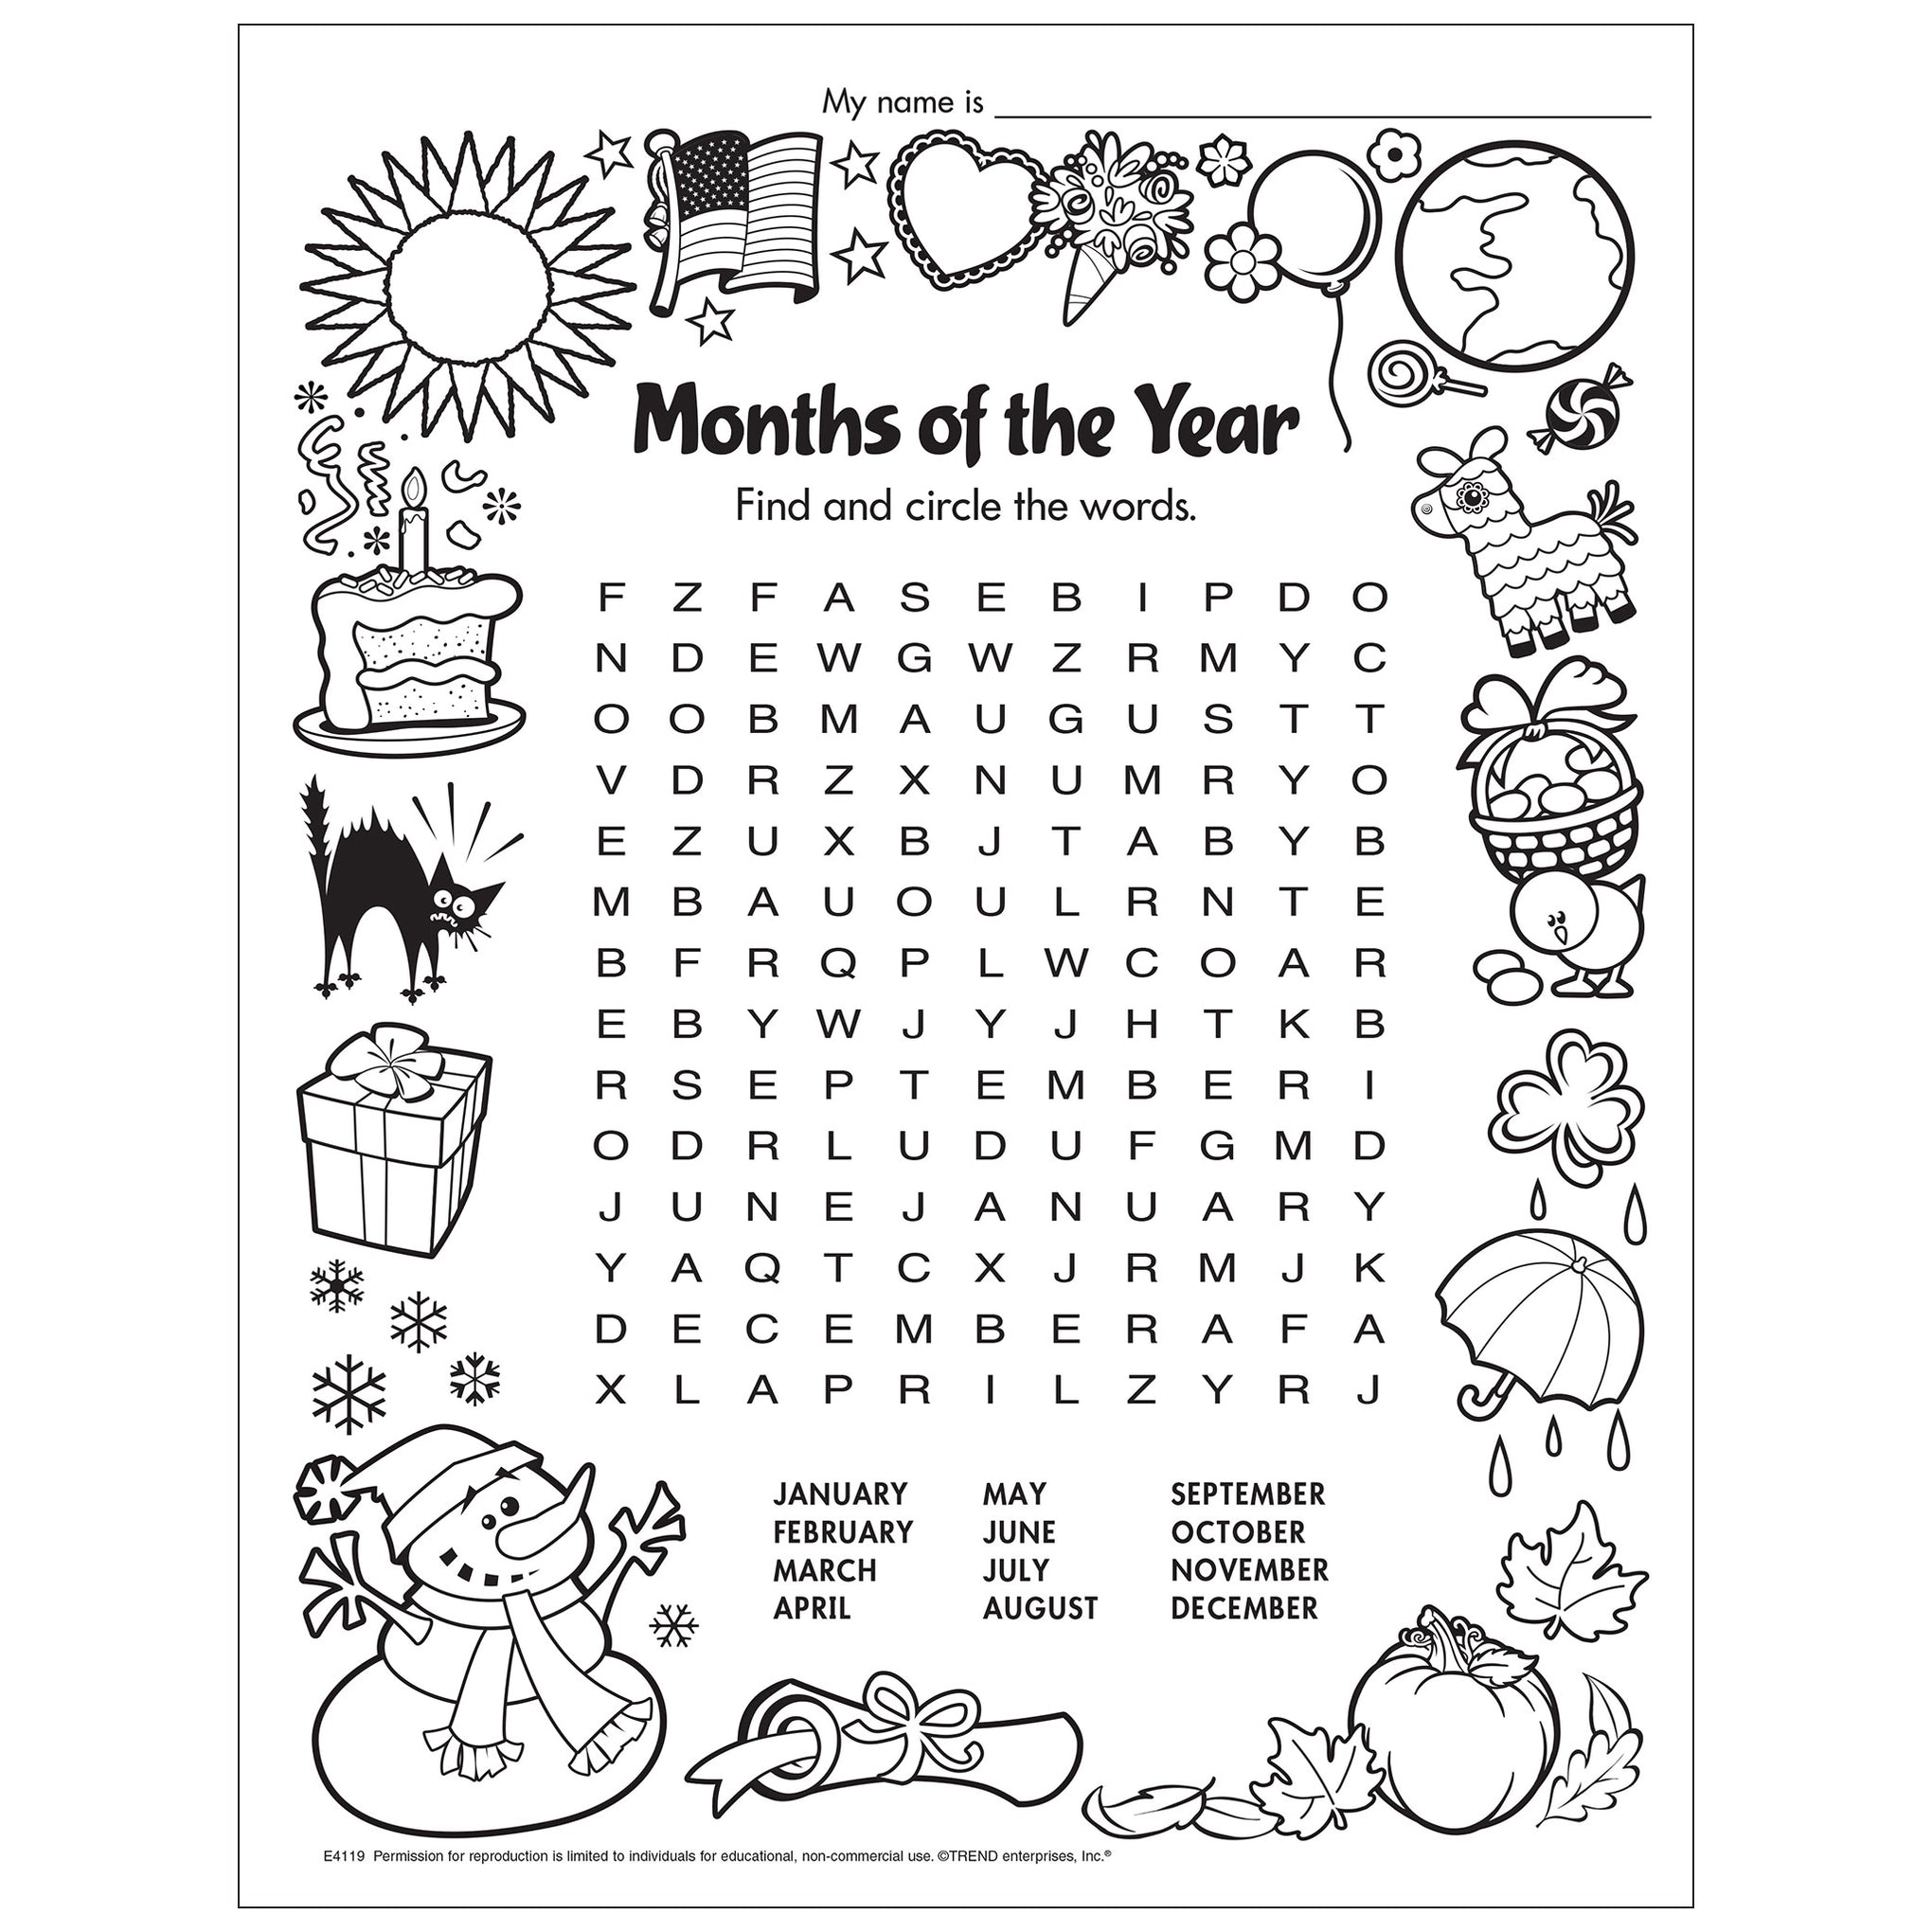 Free Printable Months Of The Year Word Search — Trend Enterprises Inc